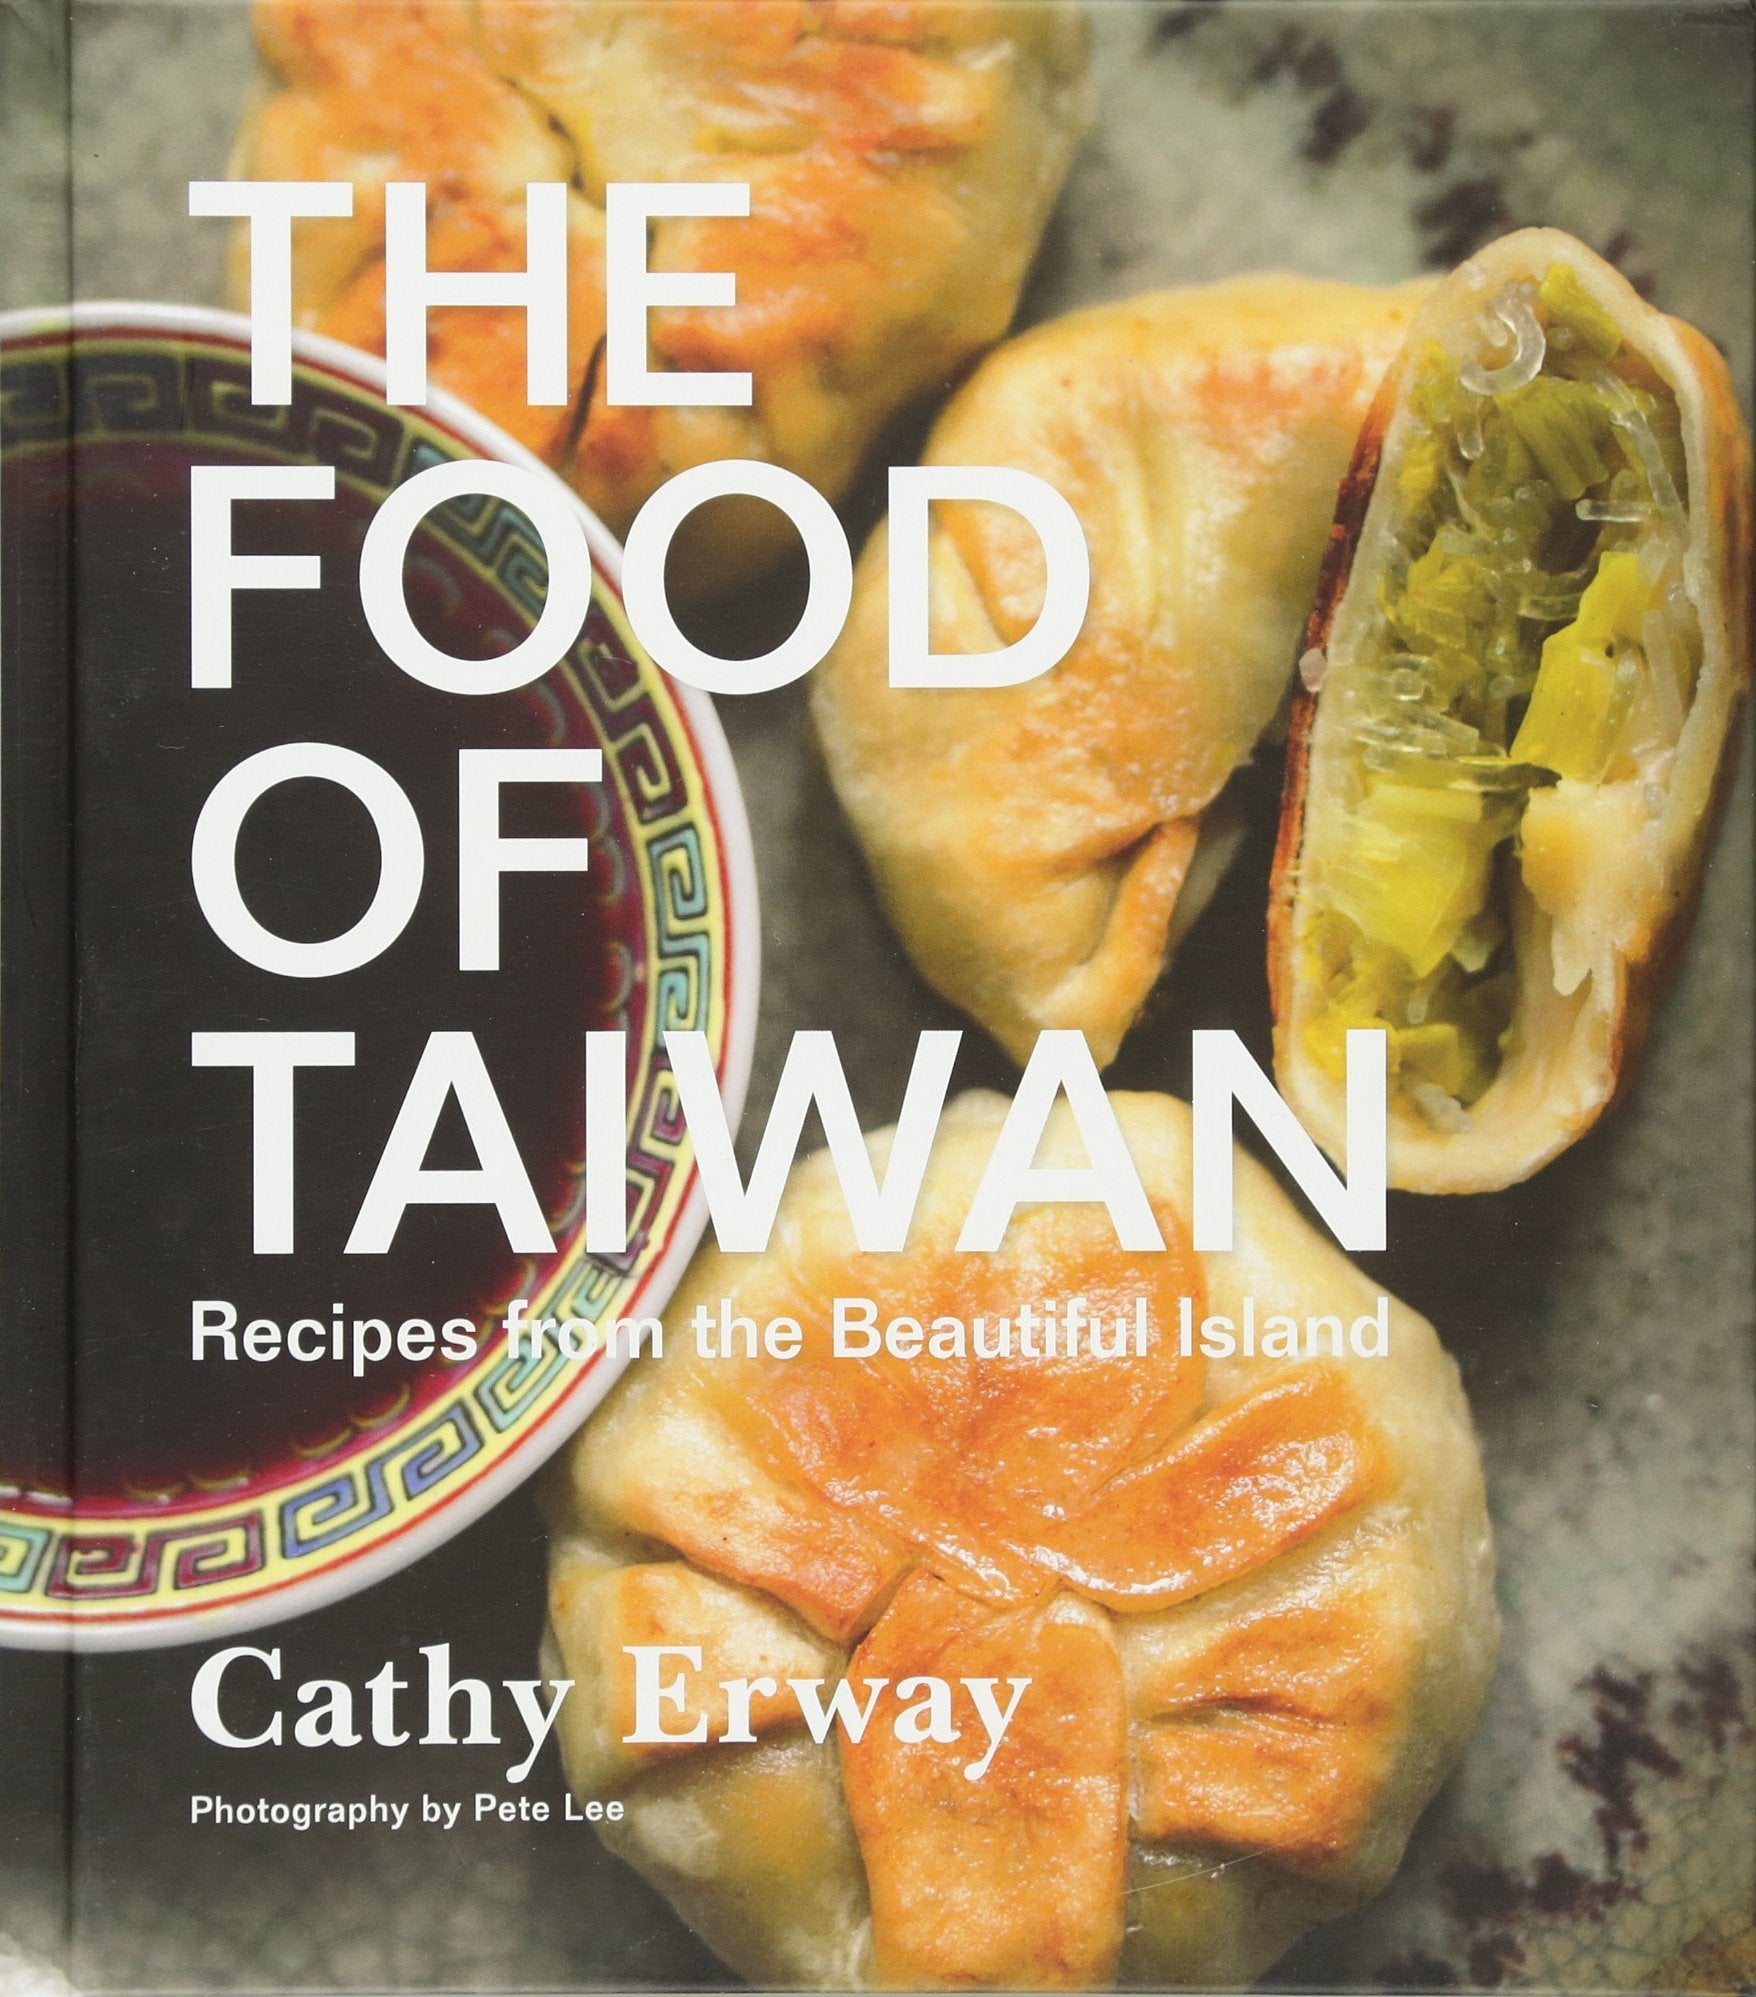 The Food of Taiwan: Recipes from the Beautiful Island (Cathy Erway)